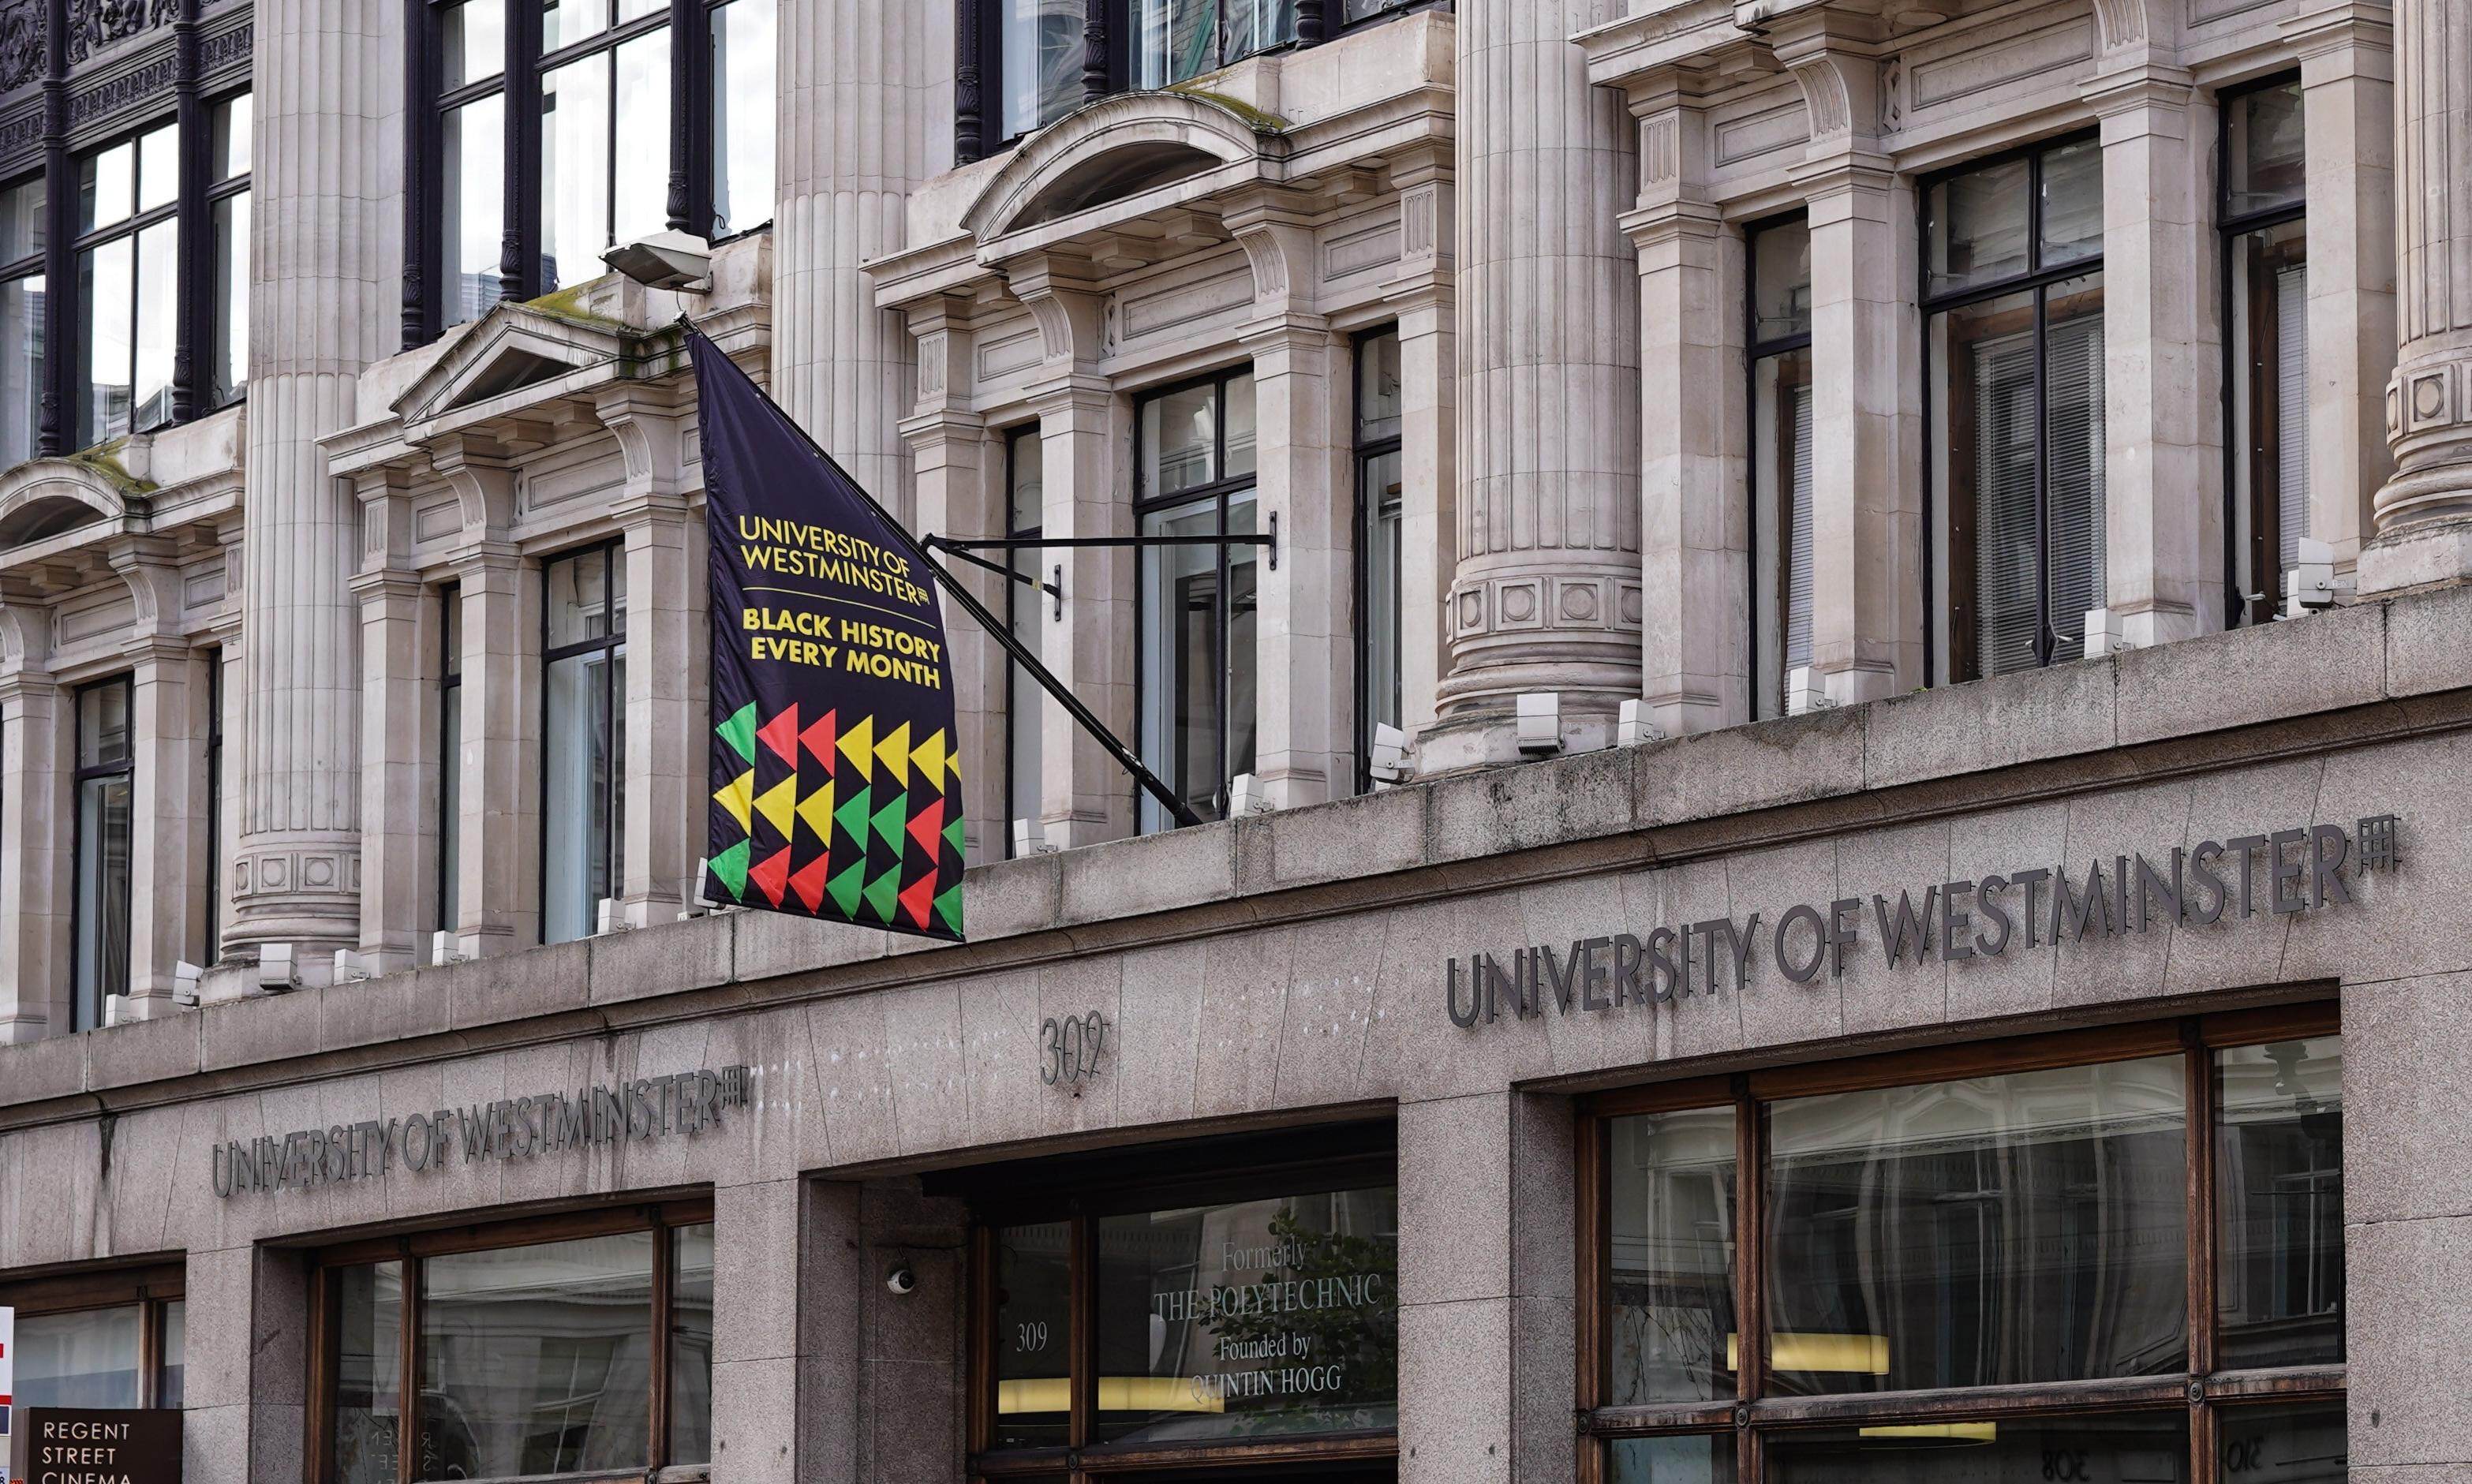 Job opportunity - Professor of Media and Communication at the University of Westminster